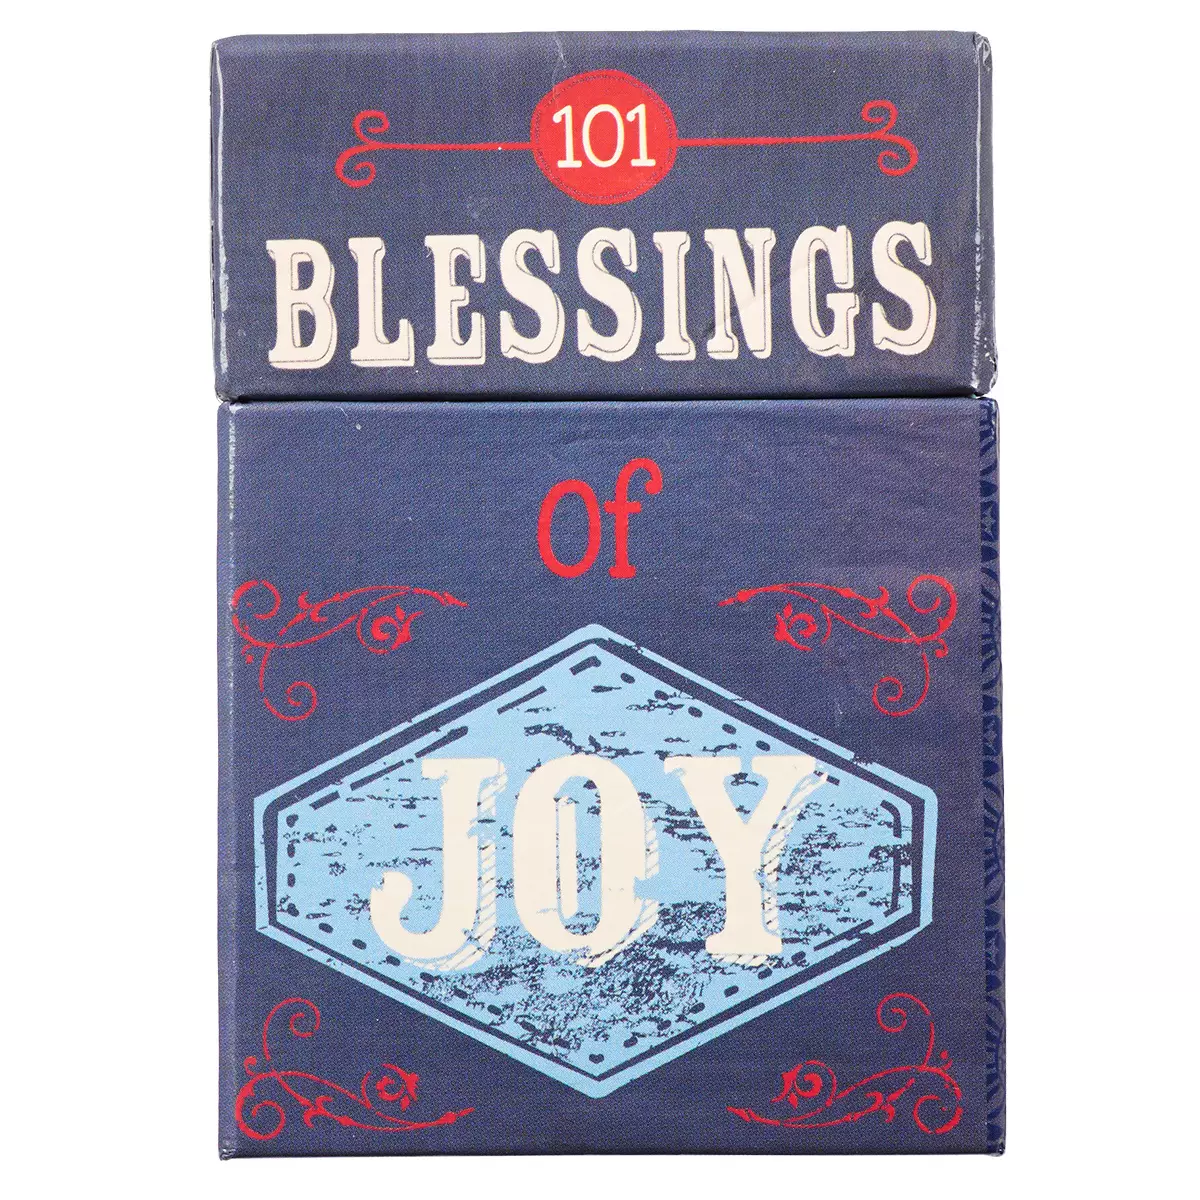 101 Blessings of Joy, A Box of Blessings